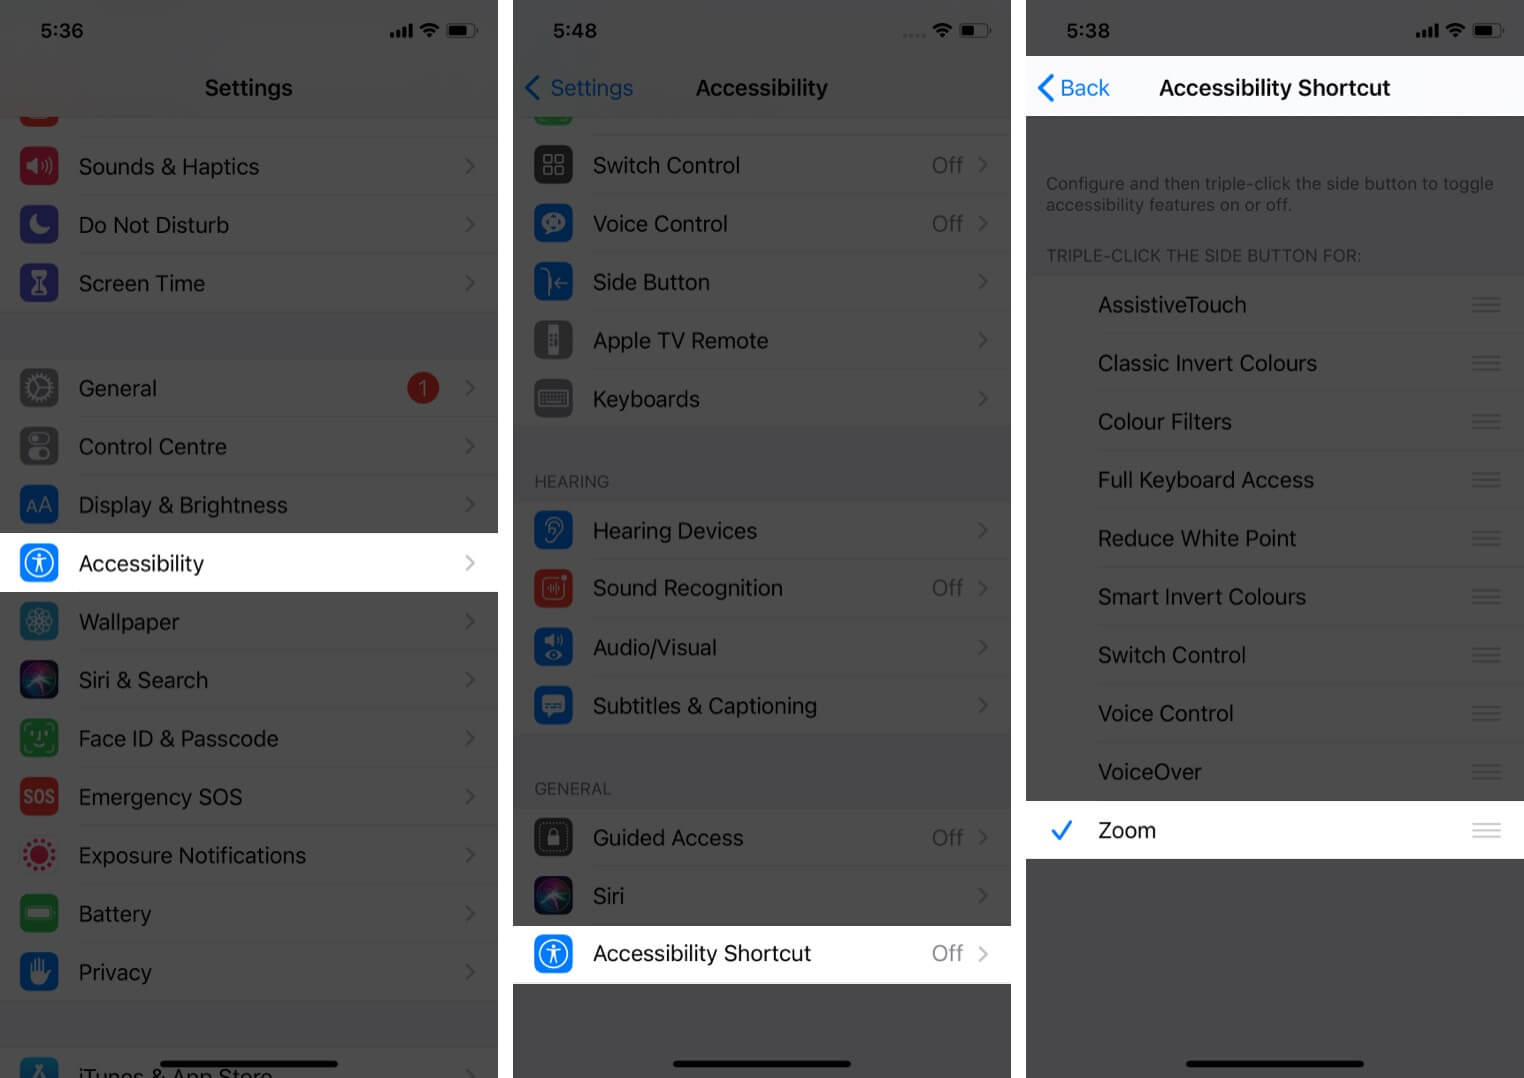 Enable Accessibility Shortcut for ultra-low brightness on iPhone